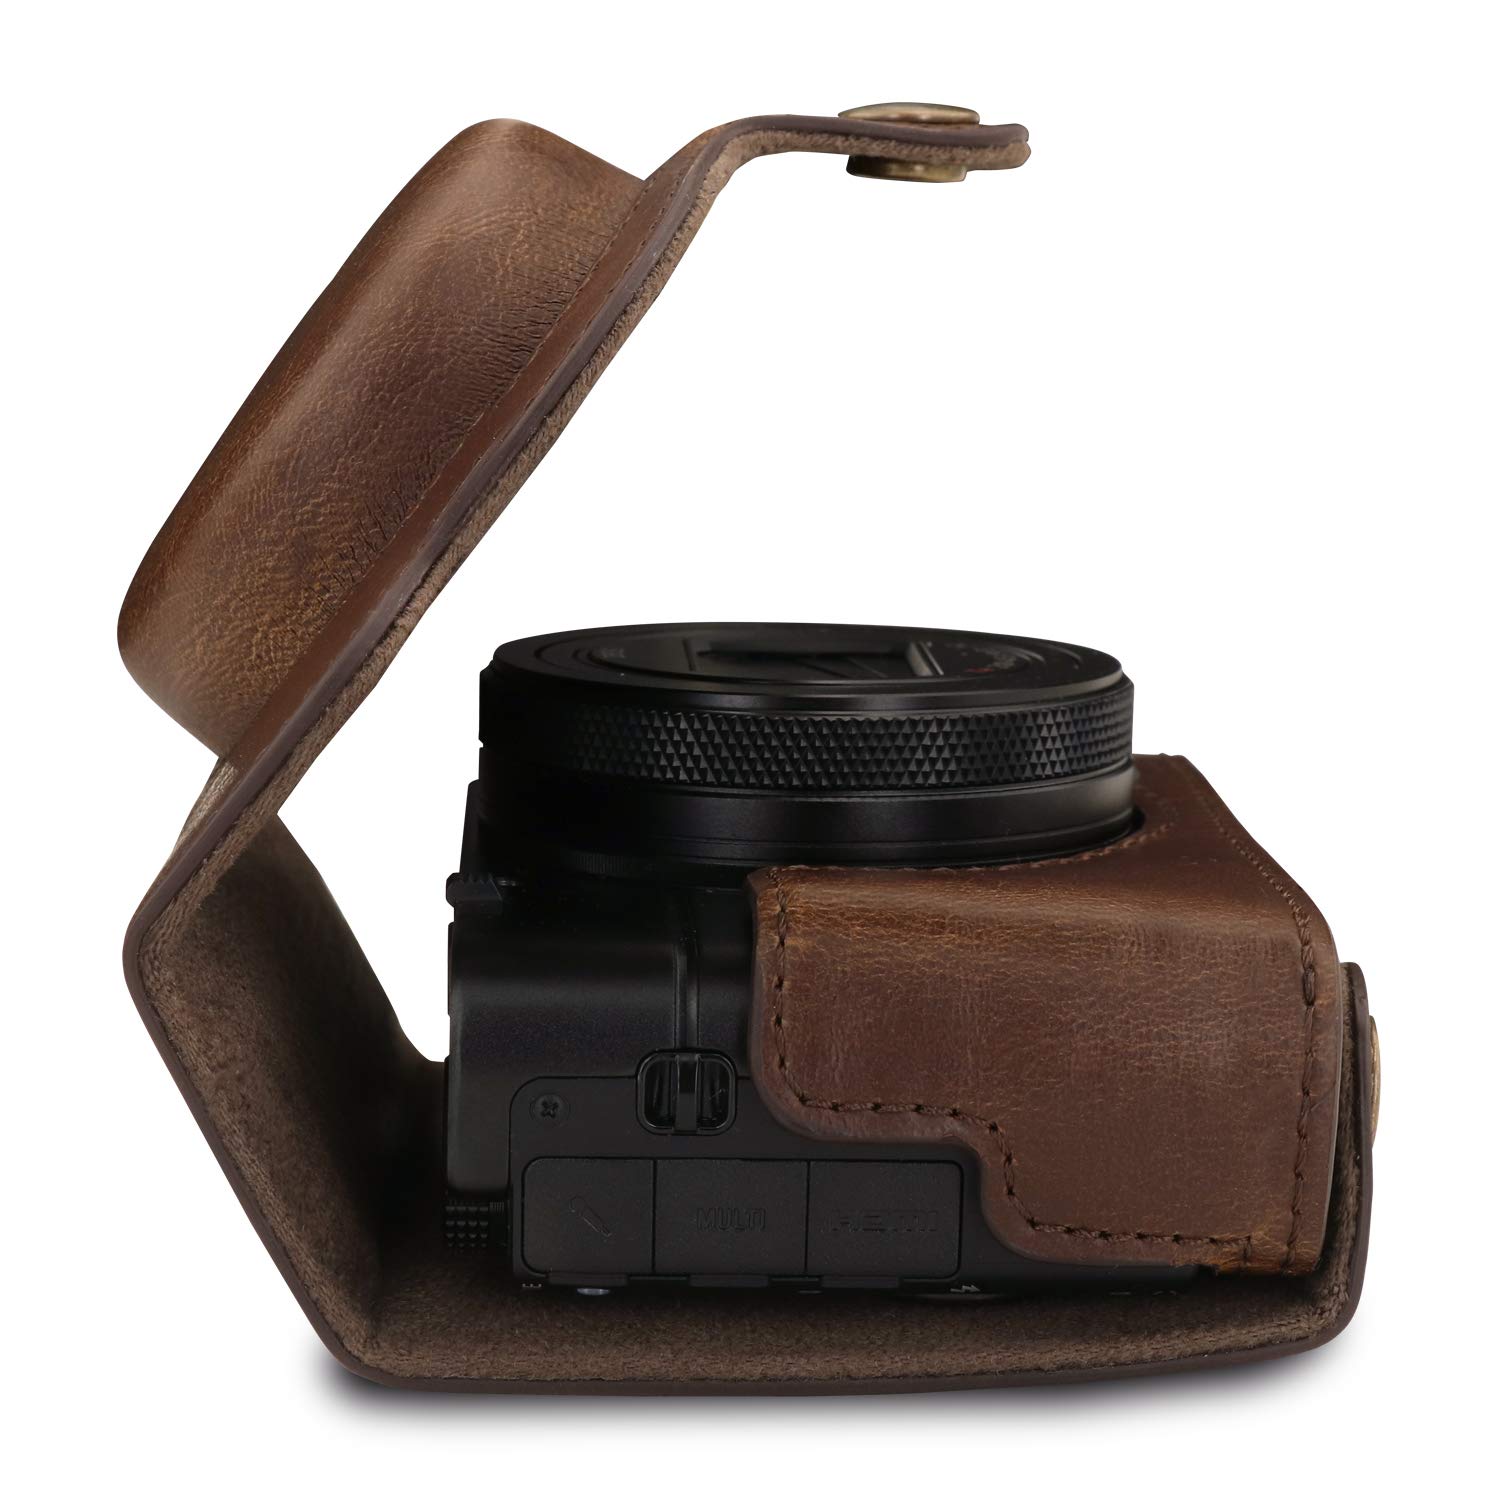 MegaGear MG1731 Ever Ready Leather Camera Case Compatible with Sony Cyber-Shot DSC-RX100 VII - Dark Brown